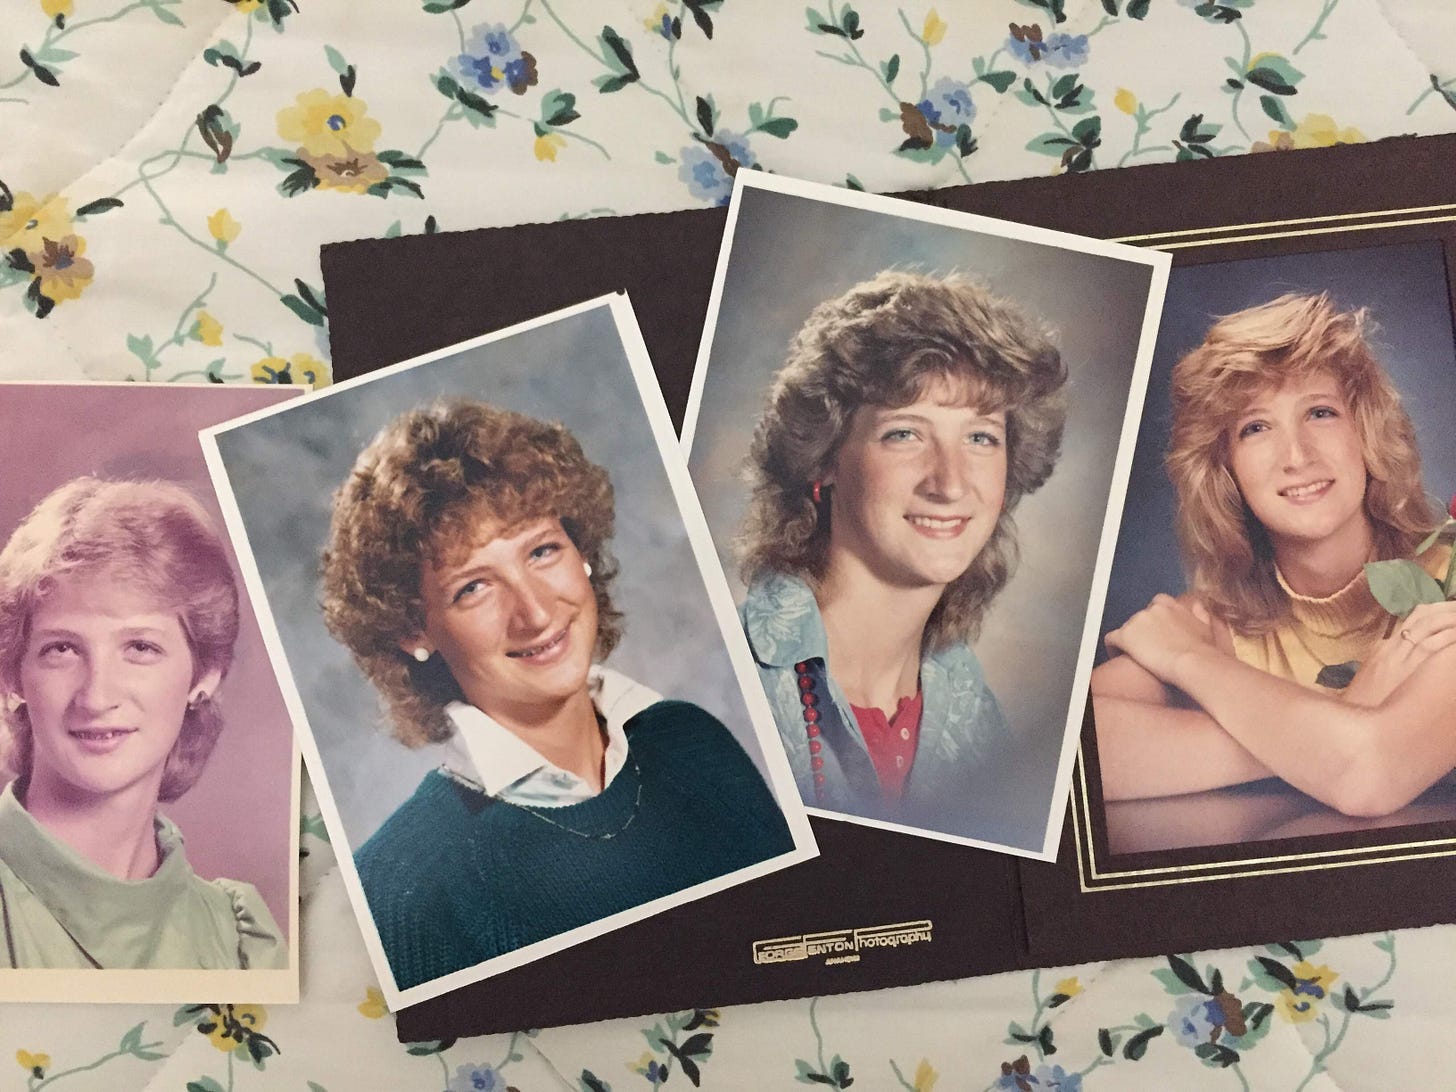 Four school photographs spread out on a flowered bedspread, one for each year of highschool, all looking like the 1980s